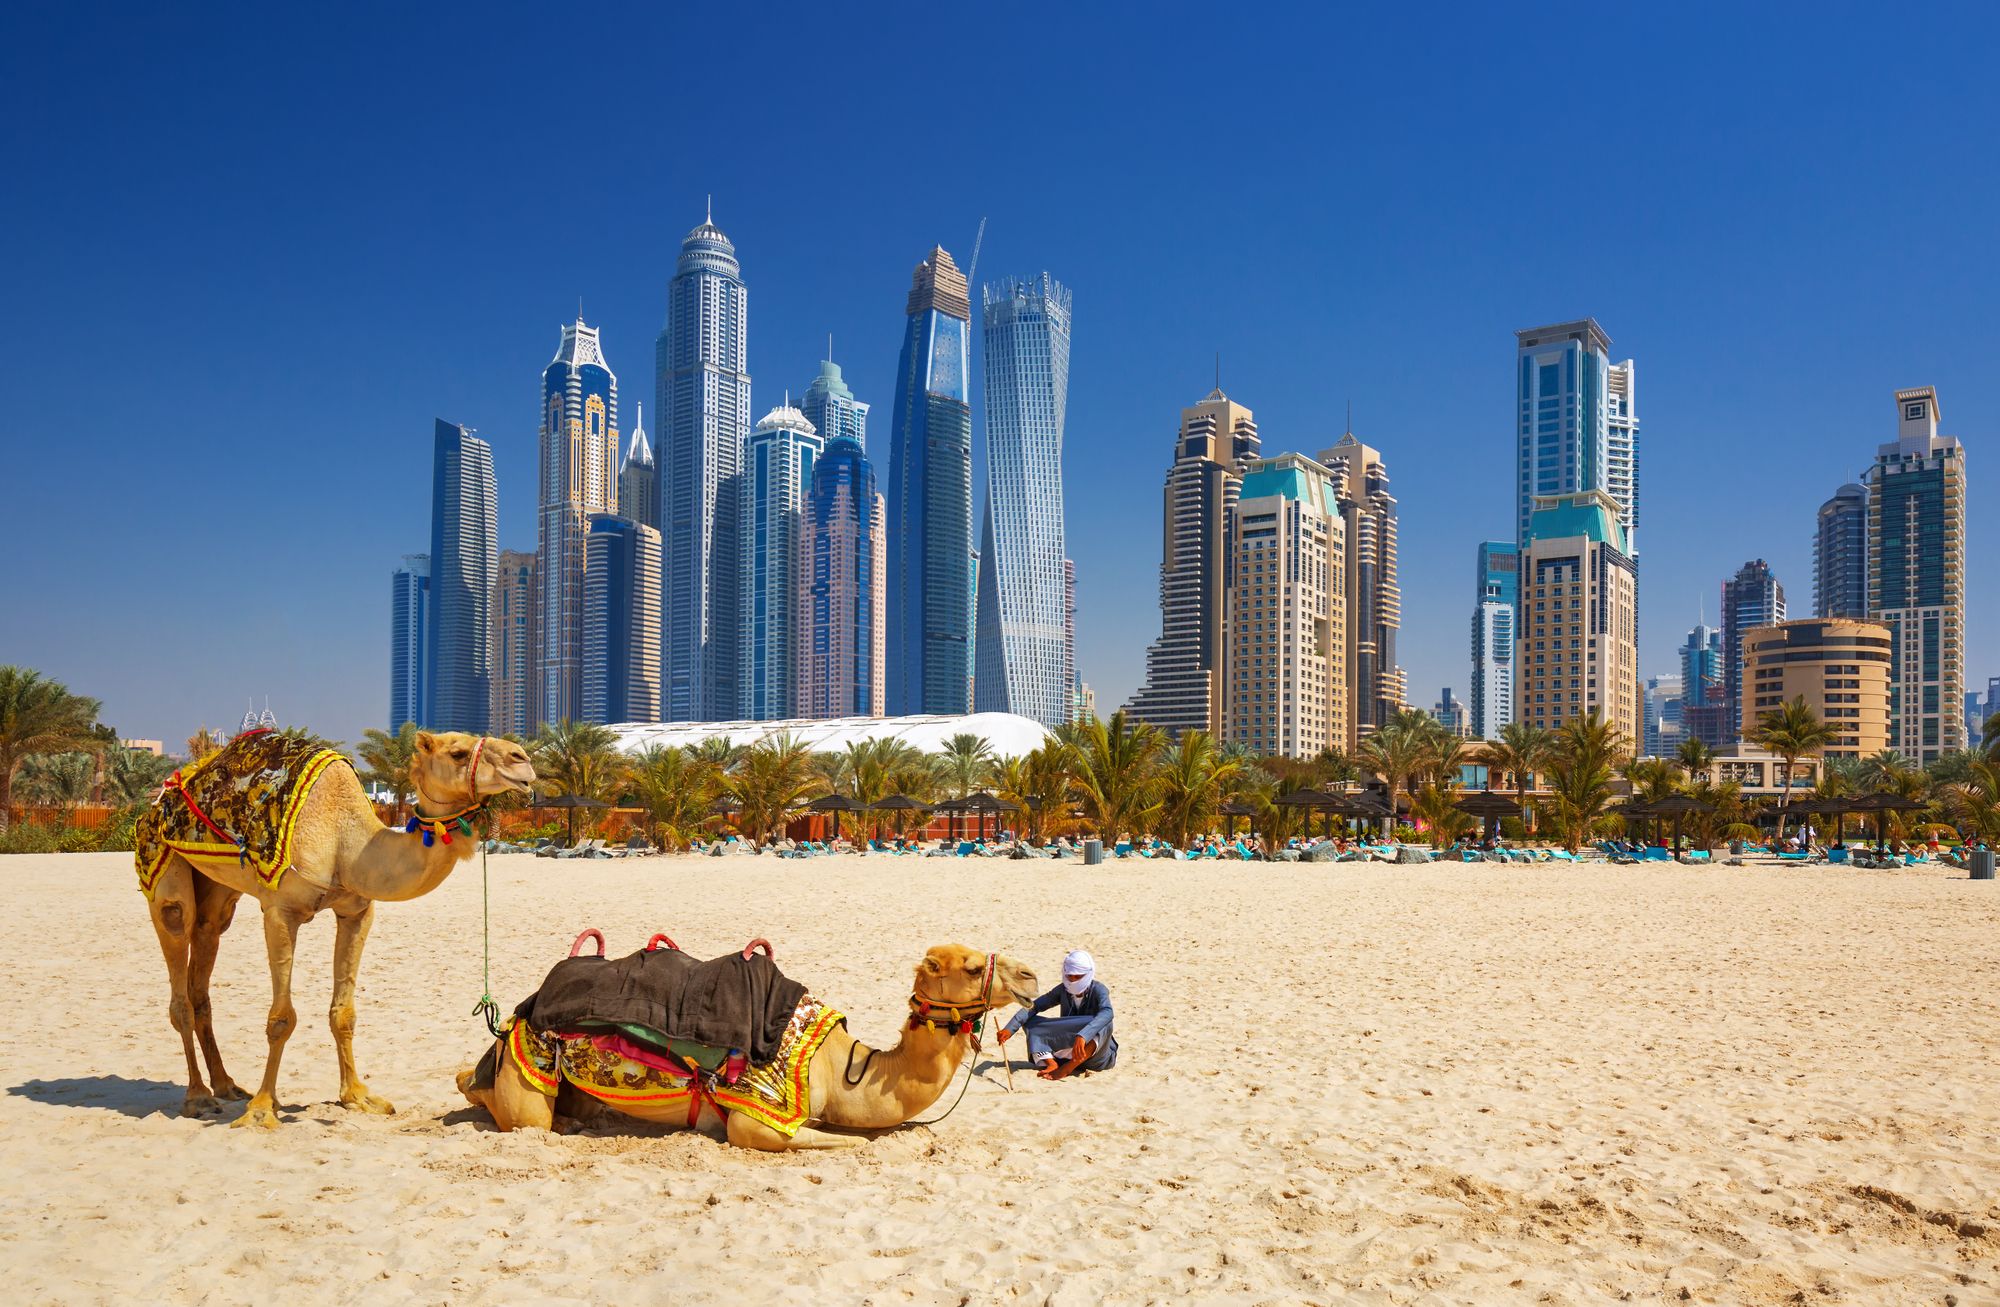 Jumeirah beach in Dubai with its skyscrapers in the background 